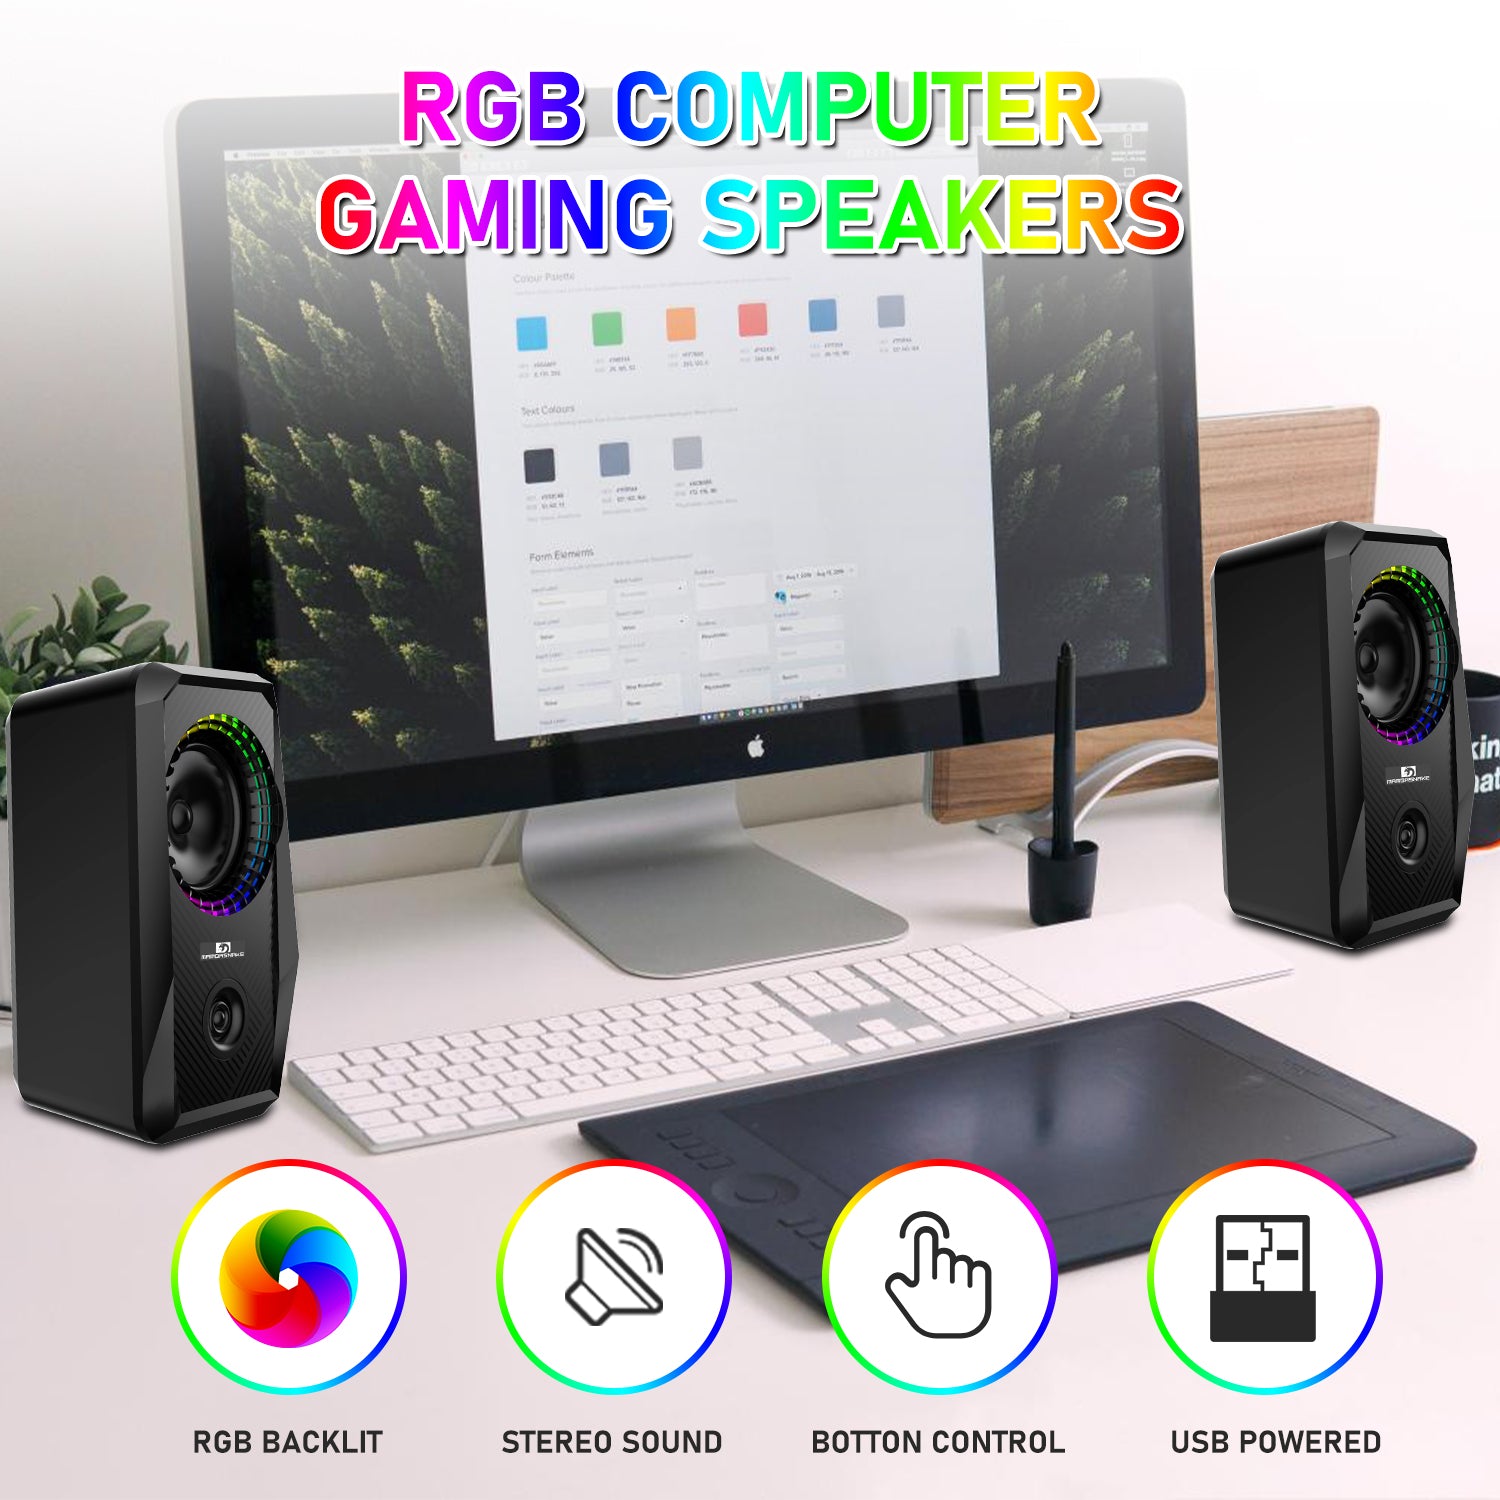 MAMBASNAKE CS-326 Wired RGB Gaming Speaker for PC 2.0 USB Powered Stereo Volume Contro, 6 LED Backlit Modes, USB Powered 3.5mm Aux Portable